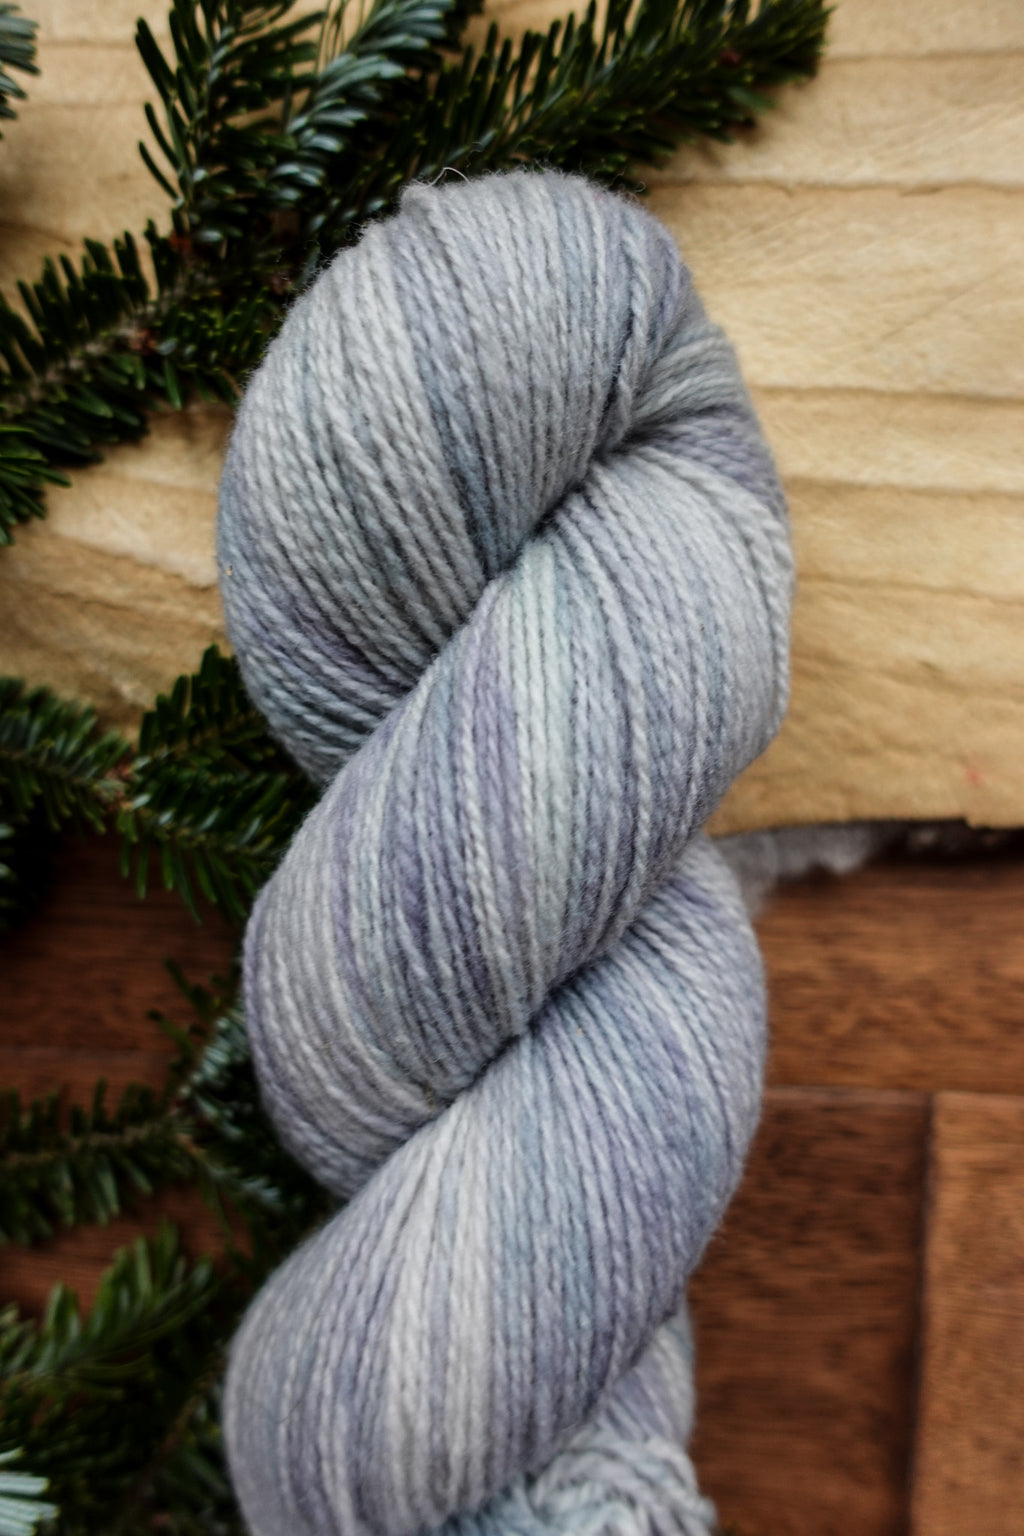 A hand dyed skein of light grey yarn lays on a tabletop, next to fir branches.